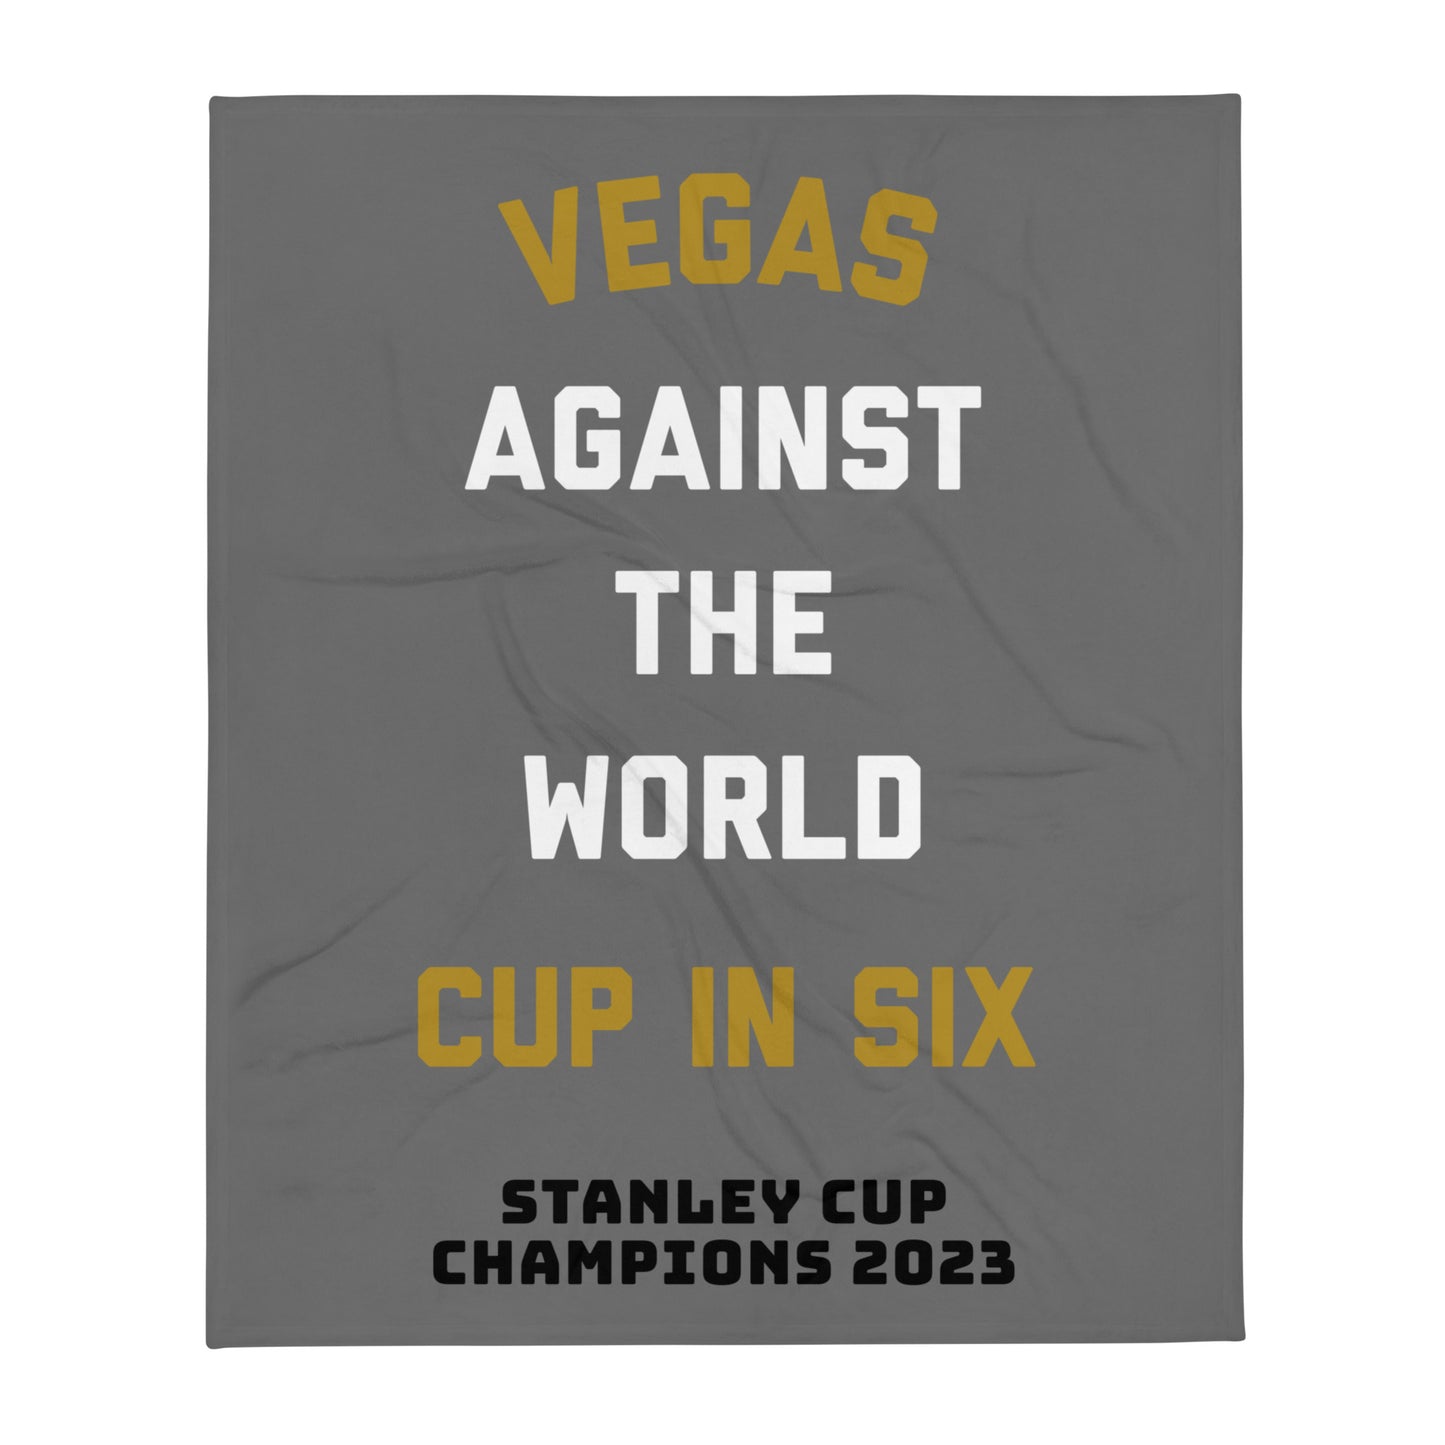 Vegas Against the World Cup in Six Throw Blanket